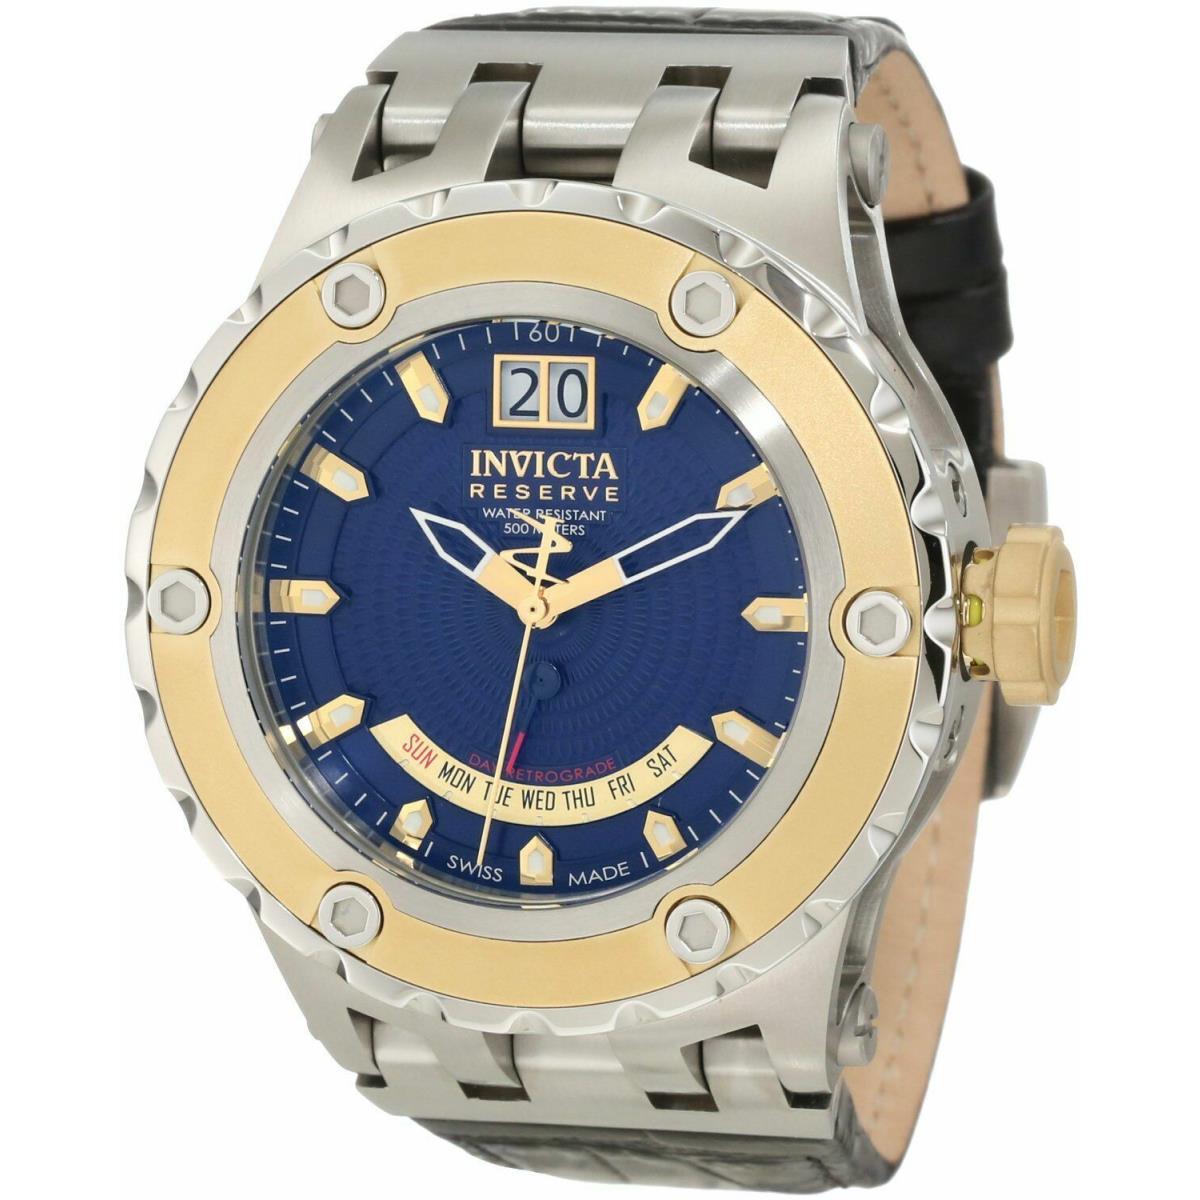 Invicta Reserve 10094 Specialty Subaqua Mens Stainless and Leather Watch - Aqua